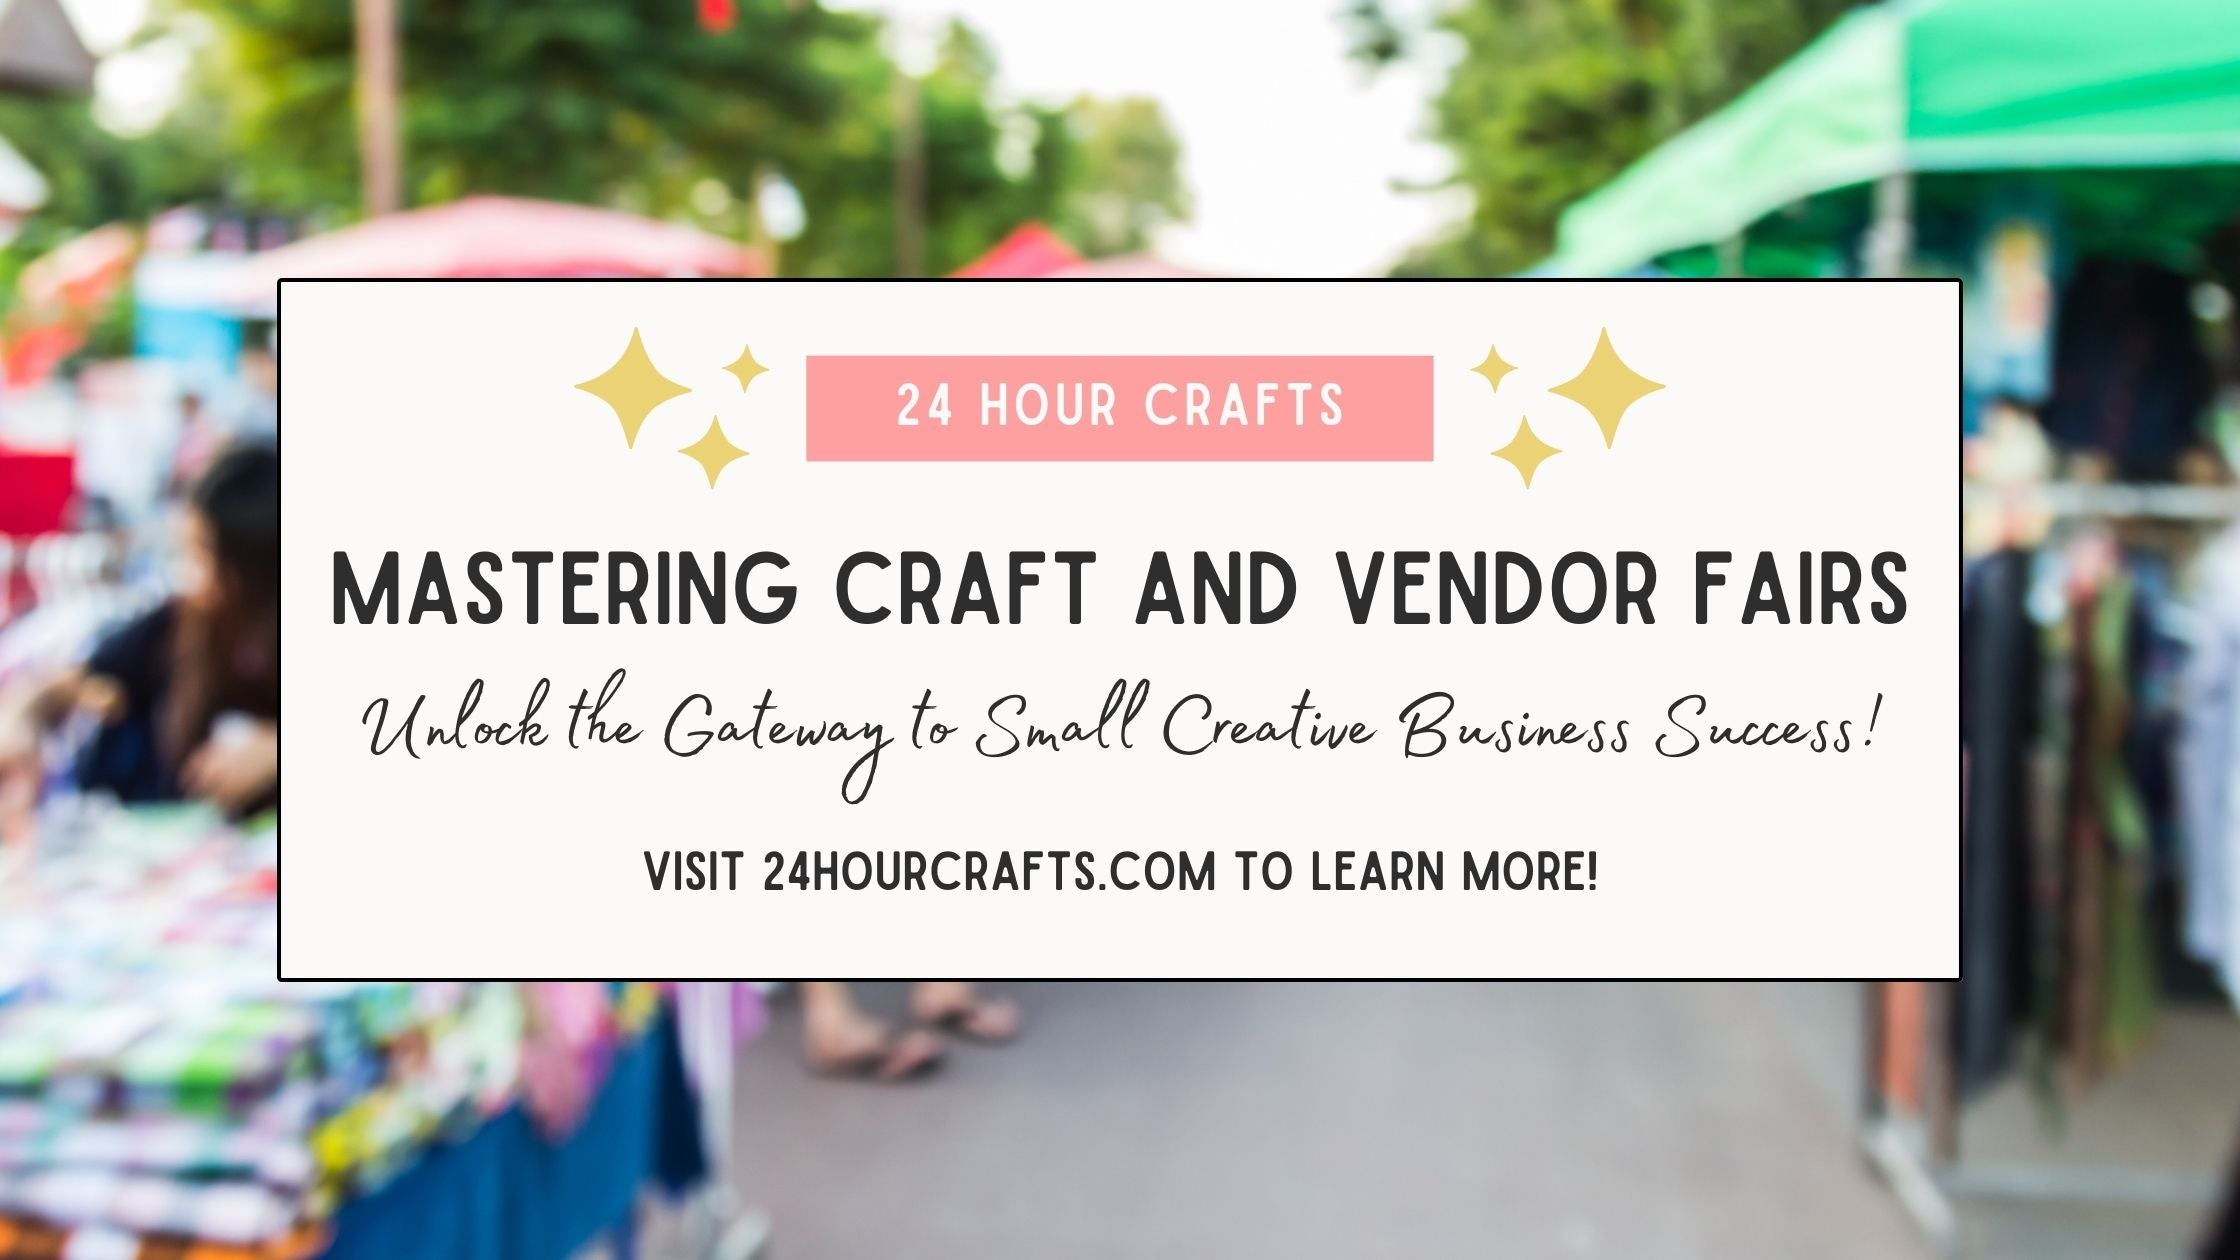 Mastering Craft and Vendor Fairs: Unlock the Gateway to Small Creative Business Success!